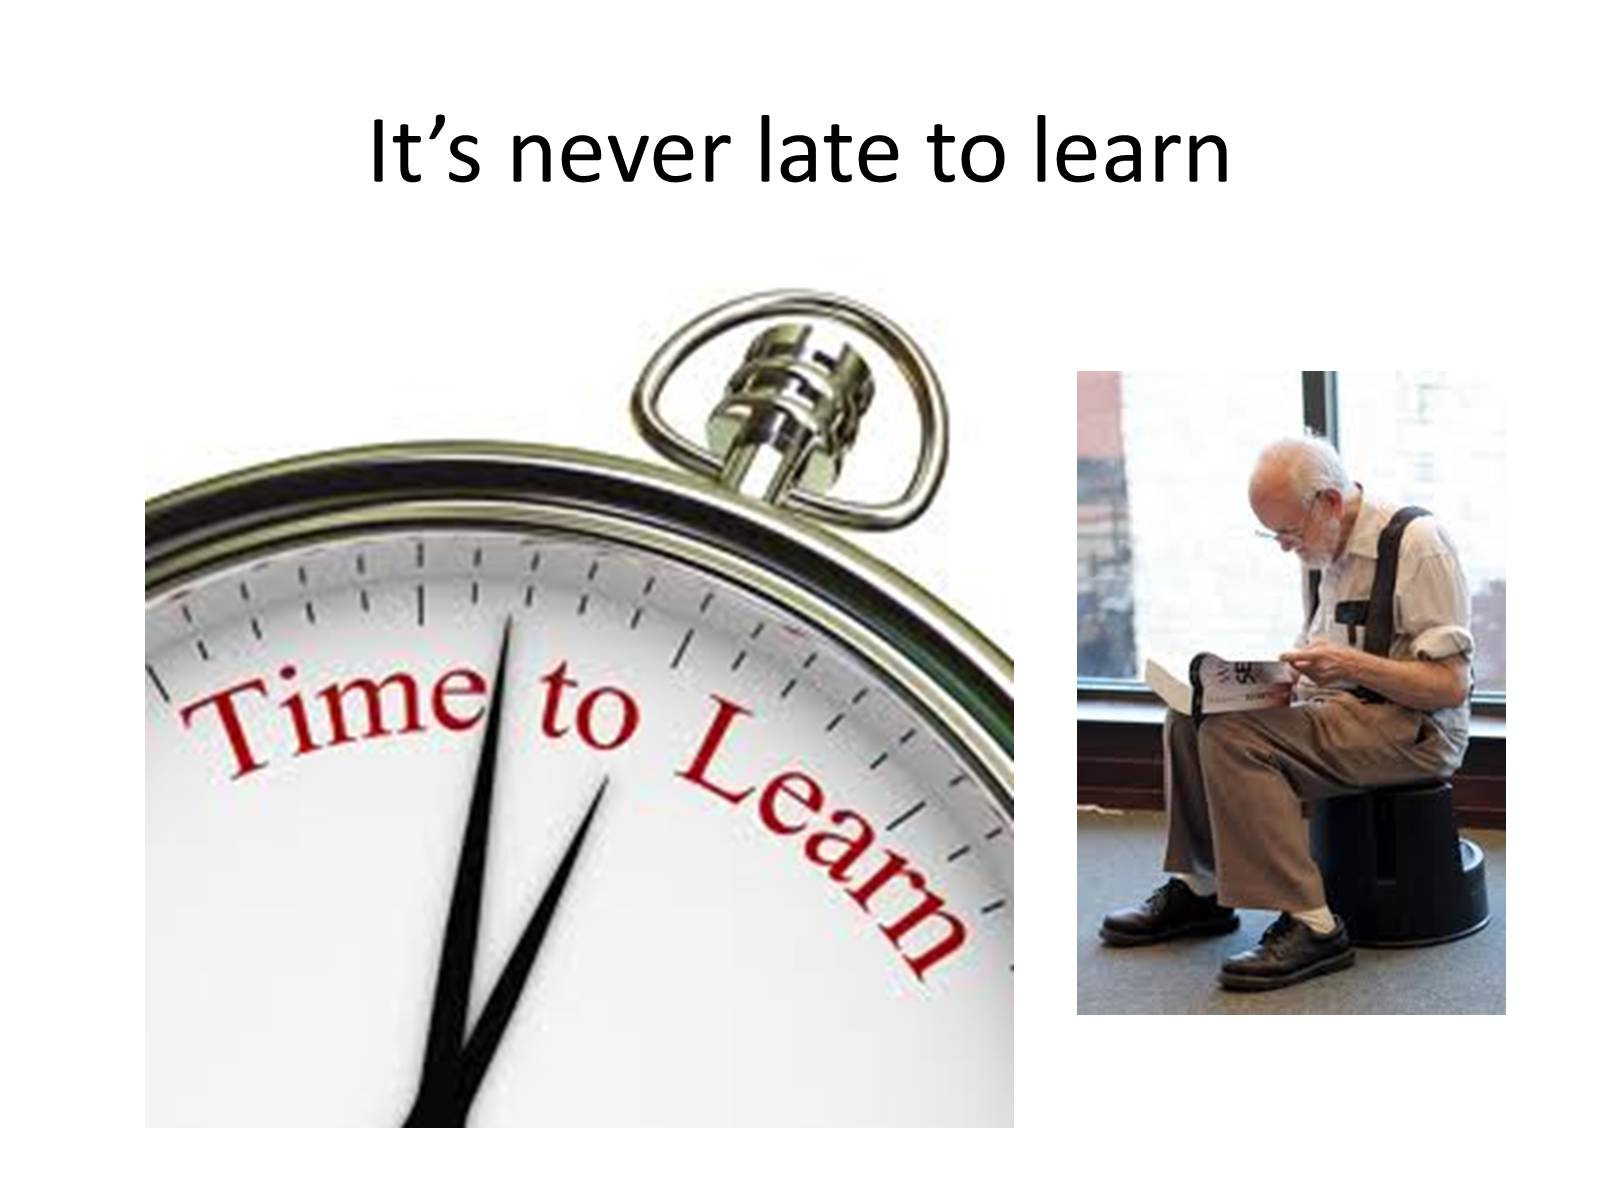 It is never too. Its never too late to learn. It's never late to learn. Never late to learn. Пословица never too late to learn.